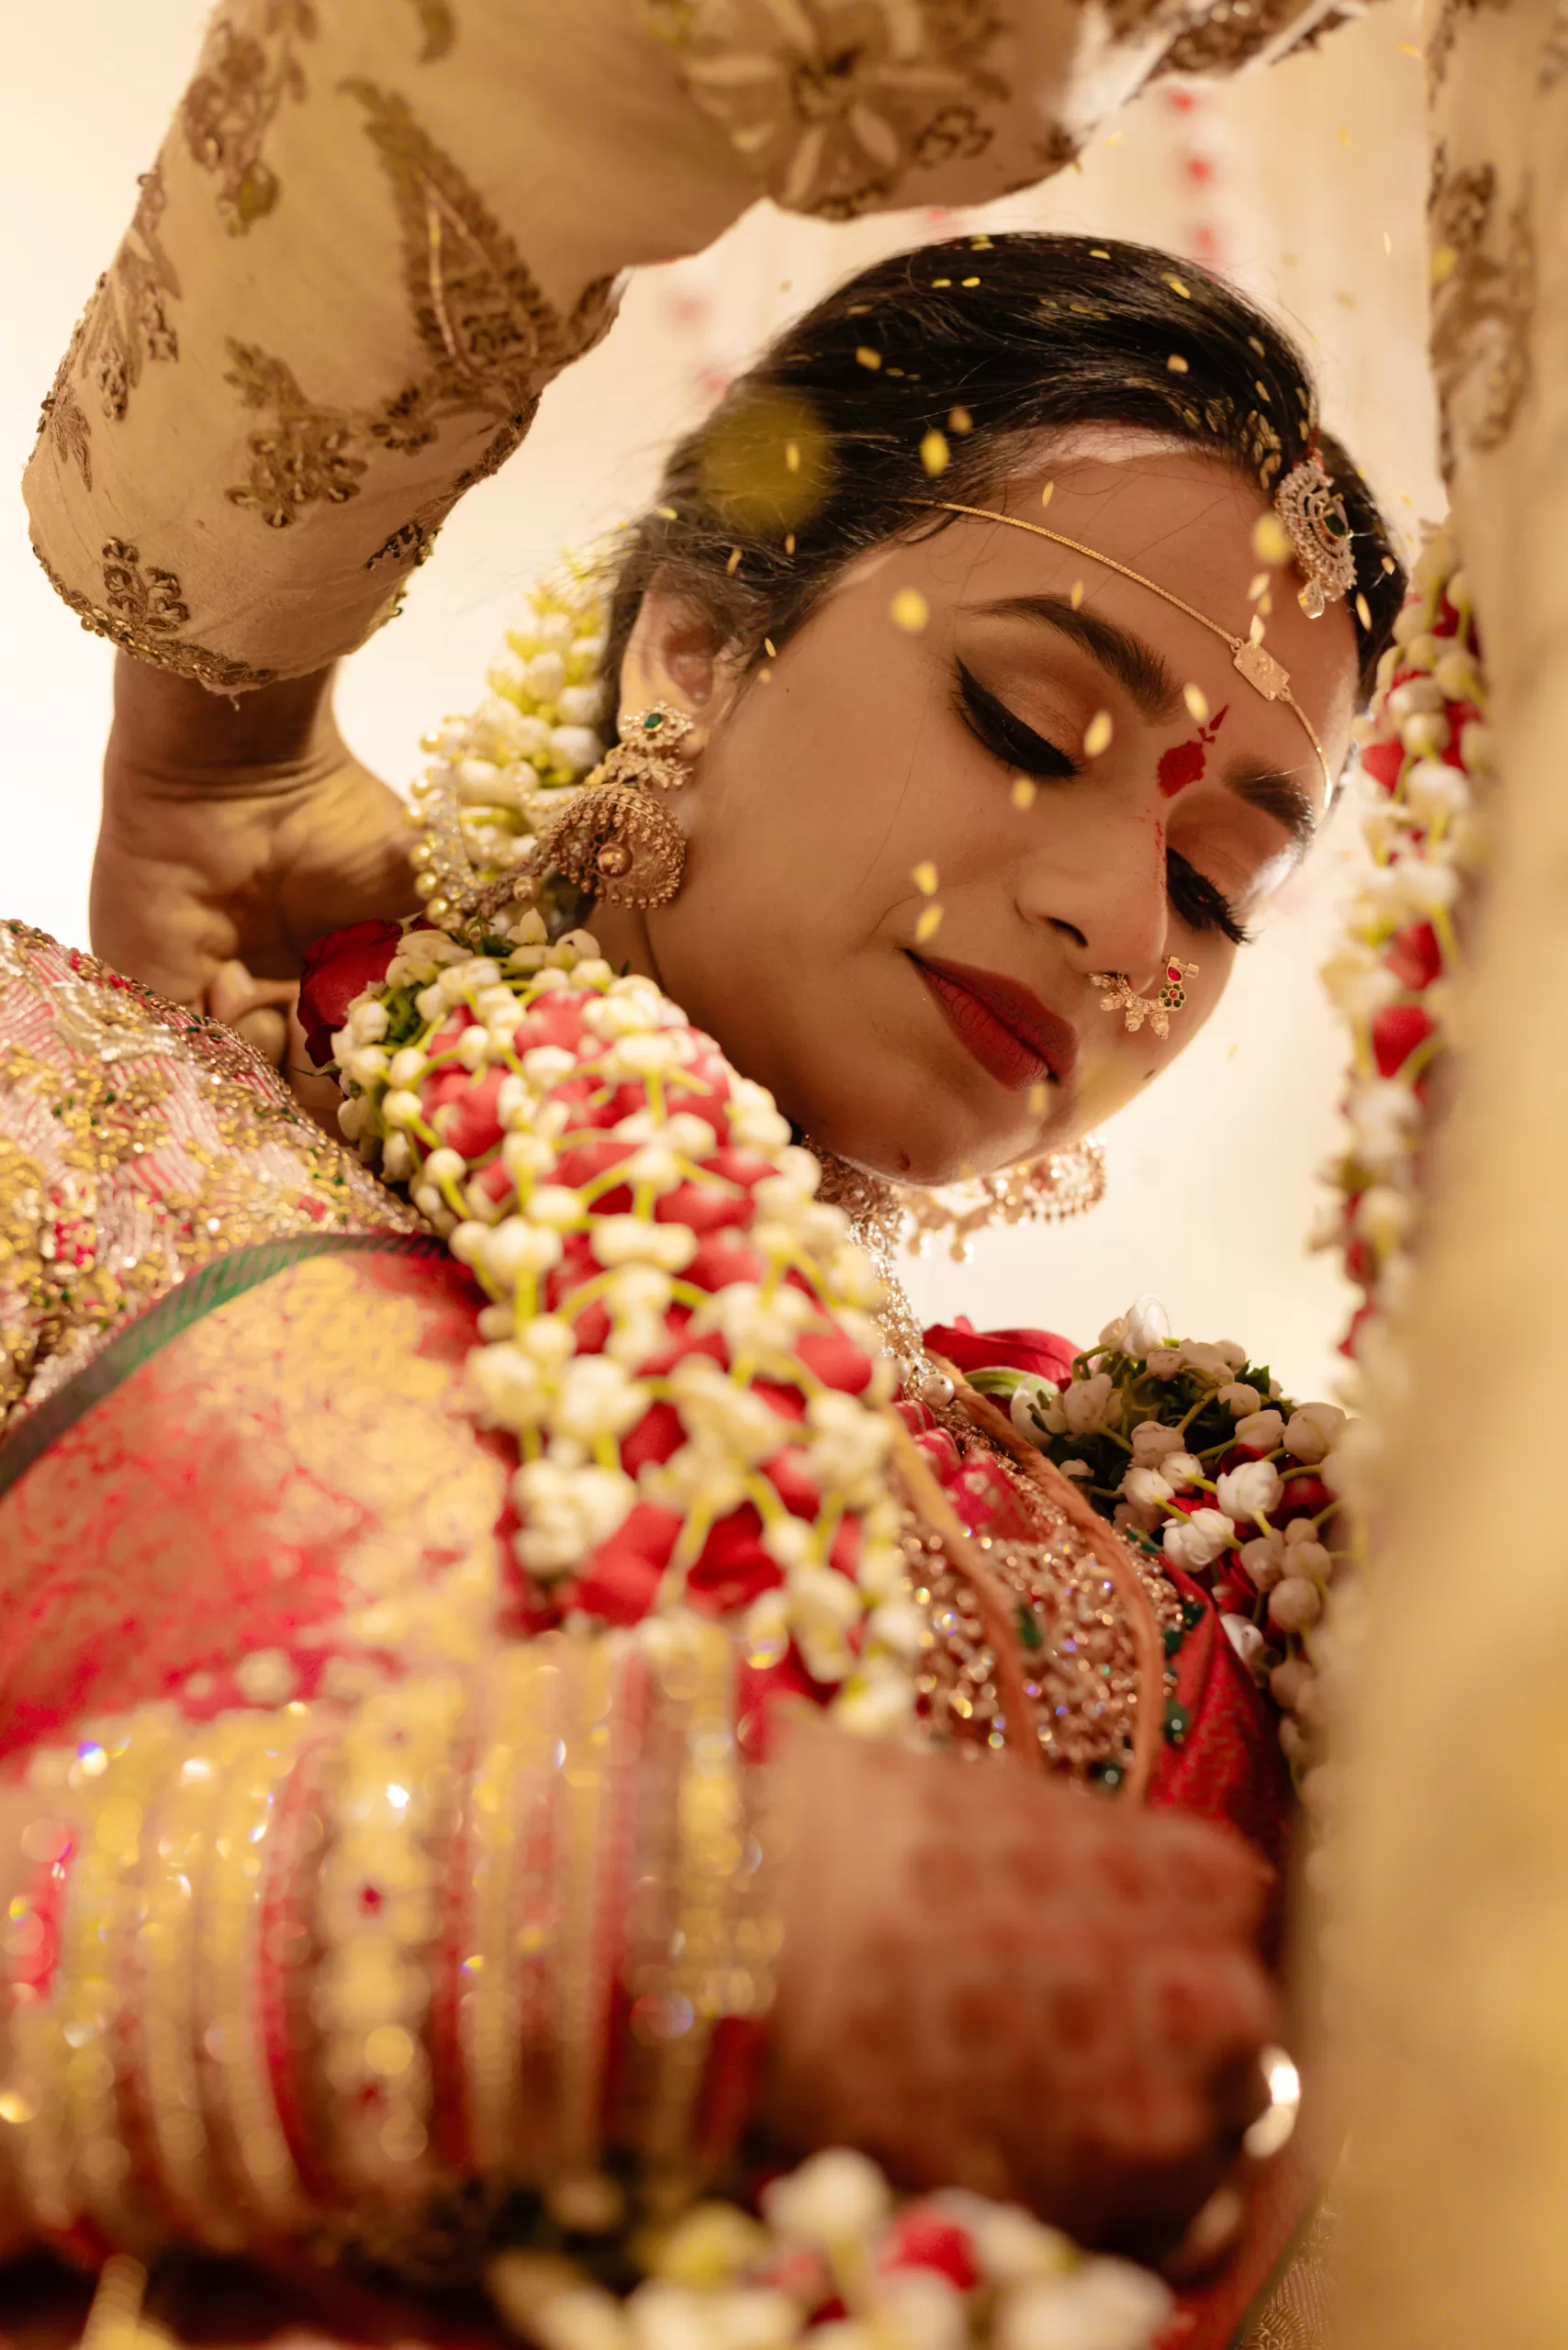 Kolkata photographer gets death threats for making model pose as Bengali  bride without clothes - IBTimes India